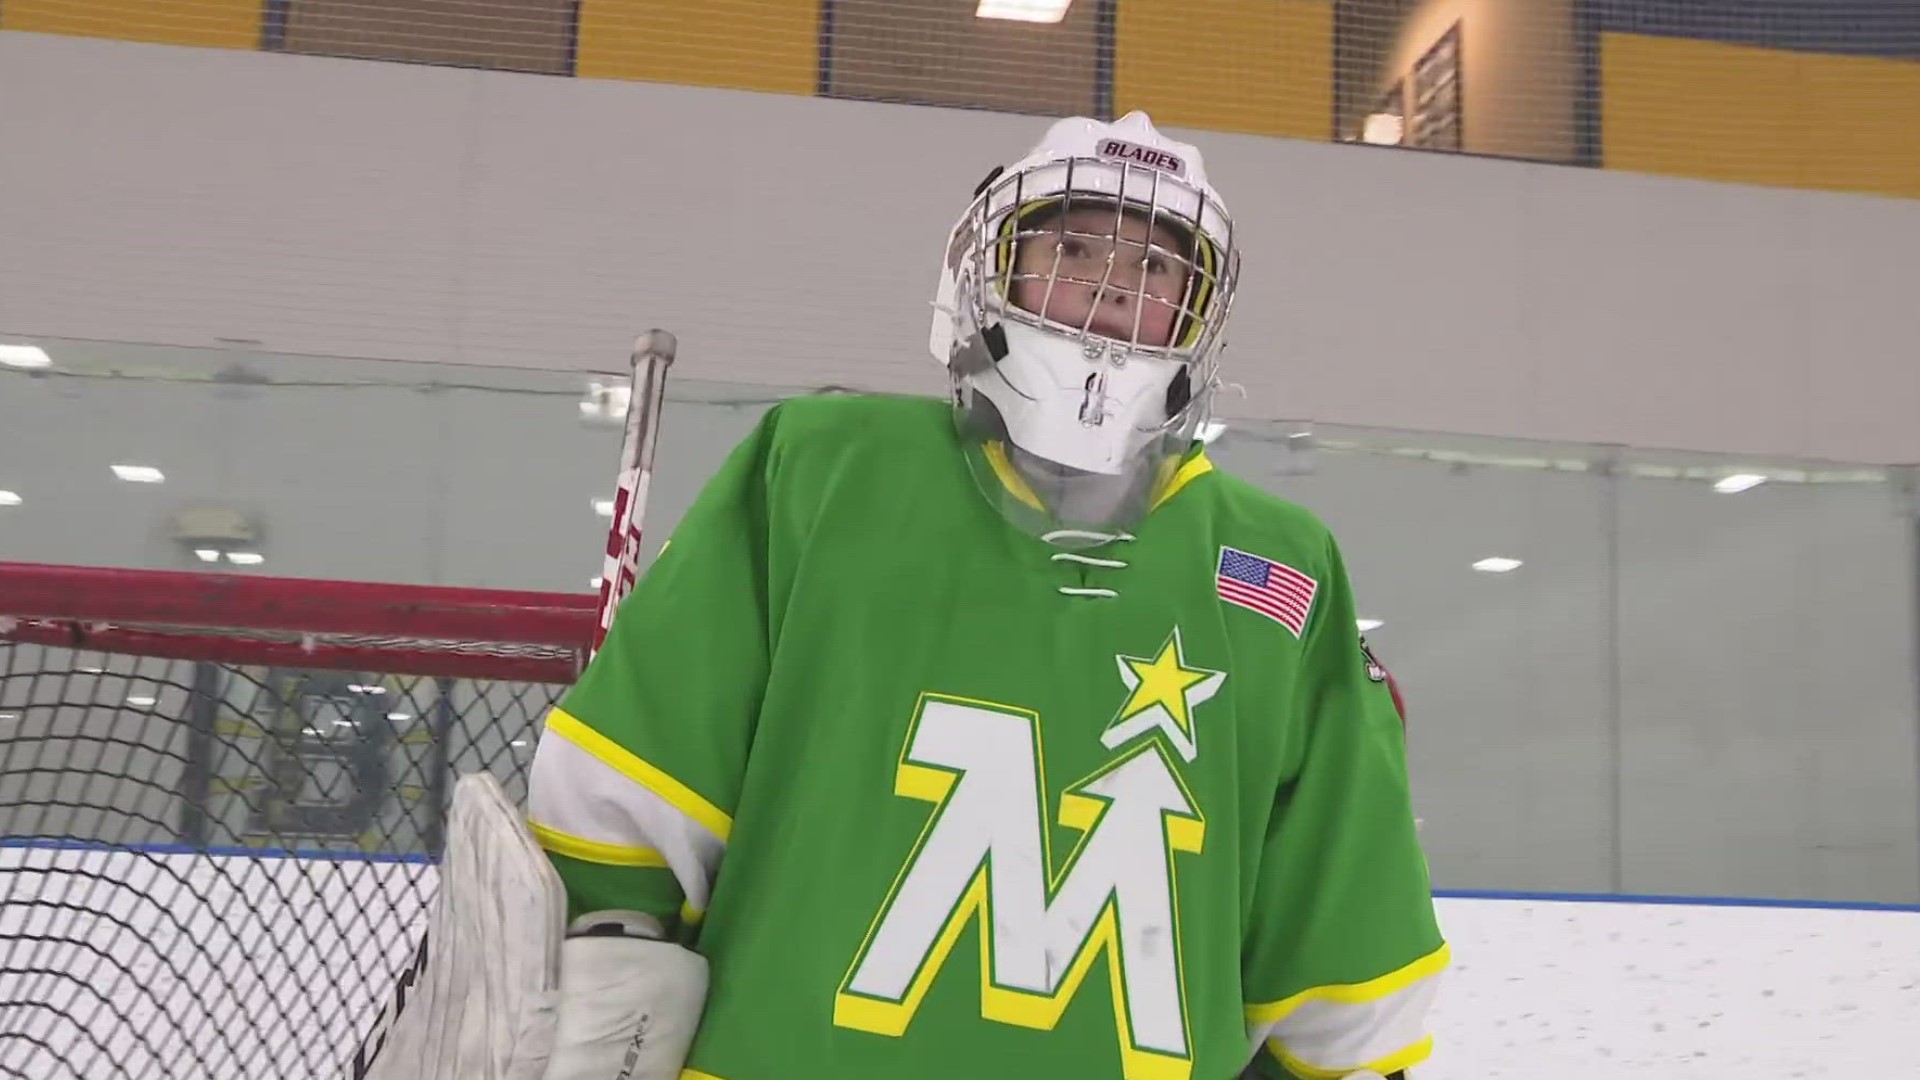 Lola Lamparkse will be the first female goalie on Minnesota's team that will play in the famed Brick Invitational Hockey Tournament.